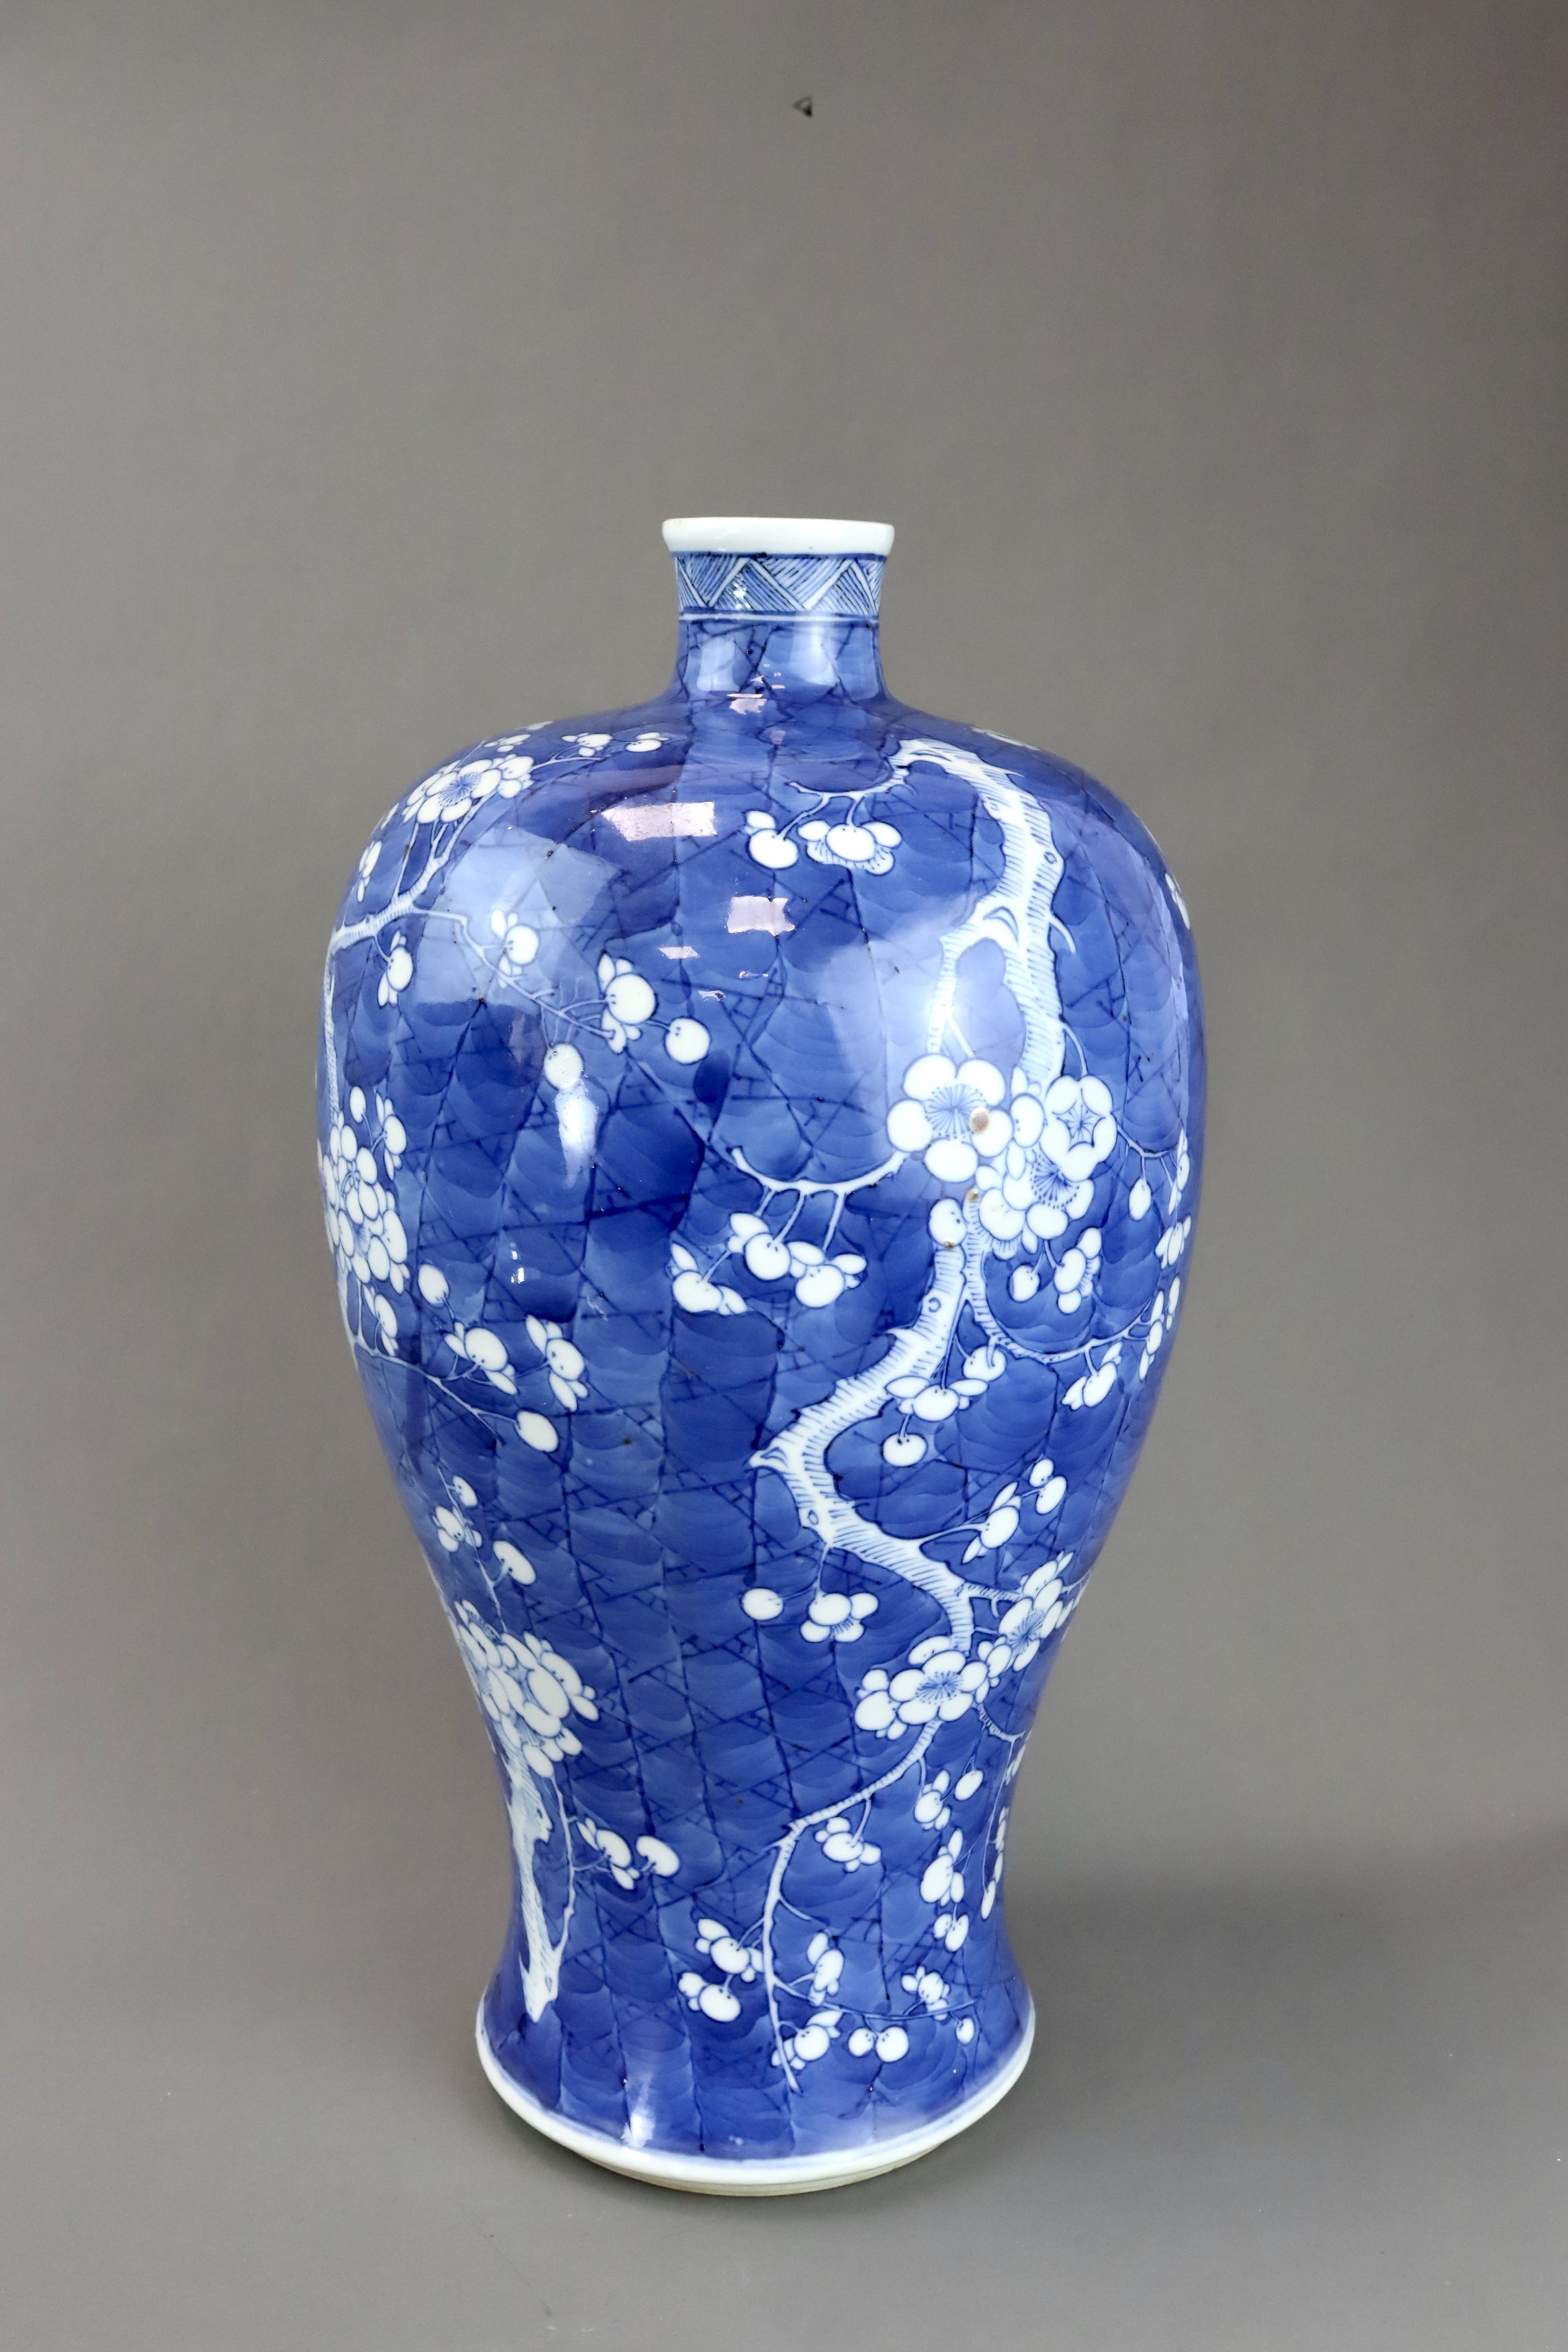 A Blue and White Vase with Prunus, 19th century - Image 2 of 7